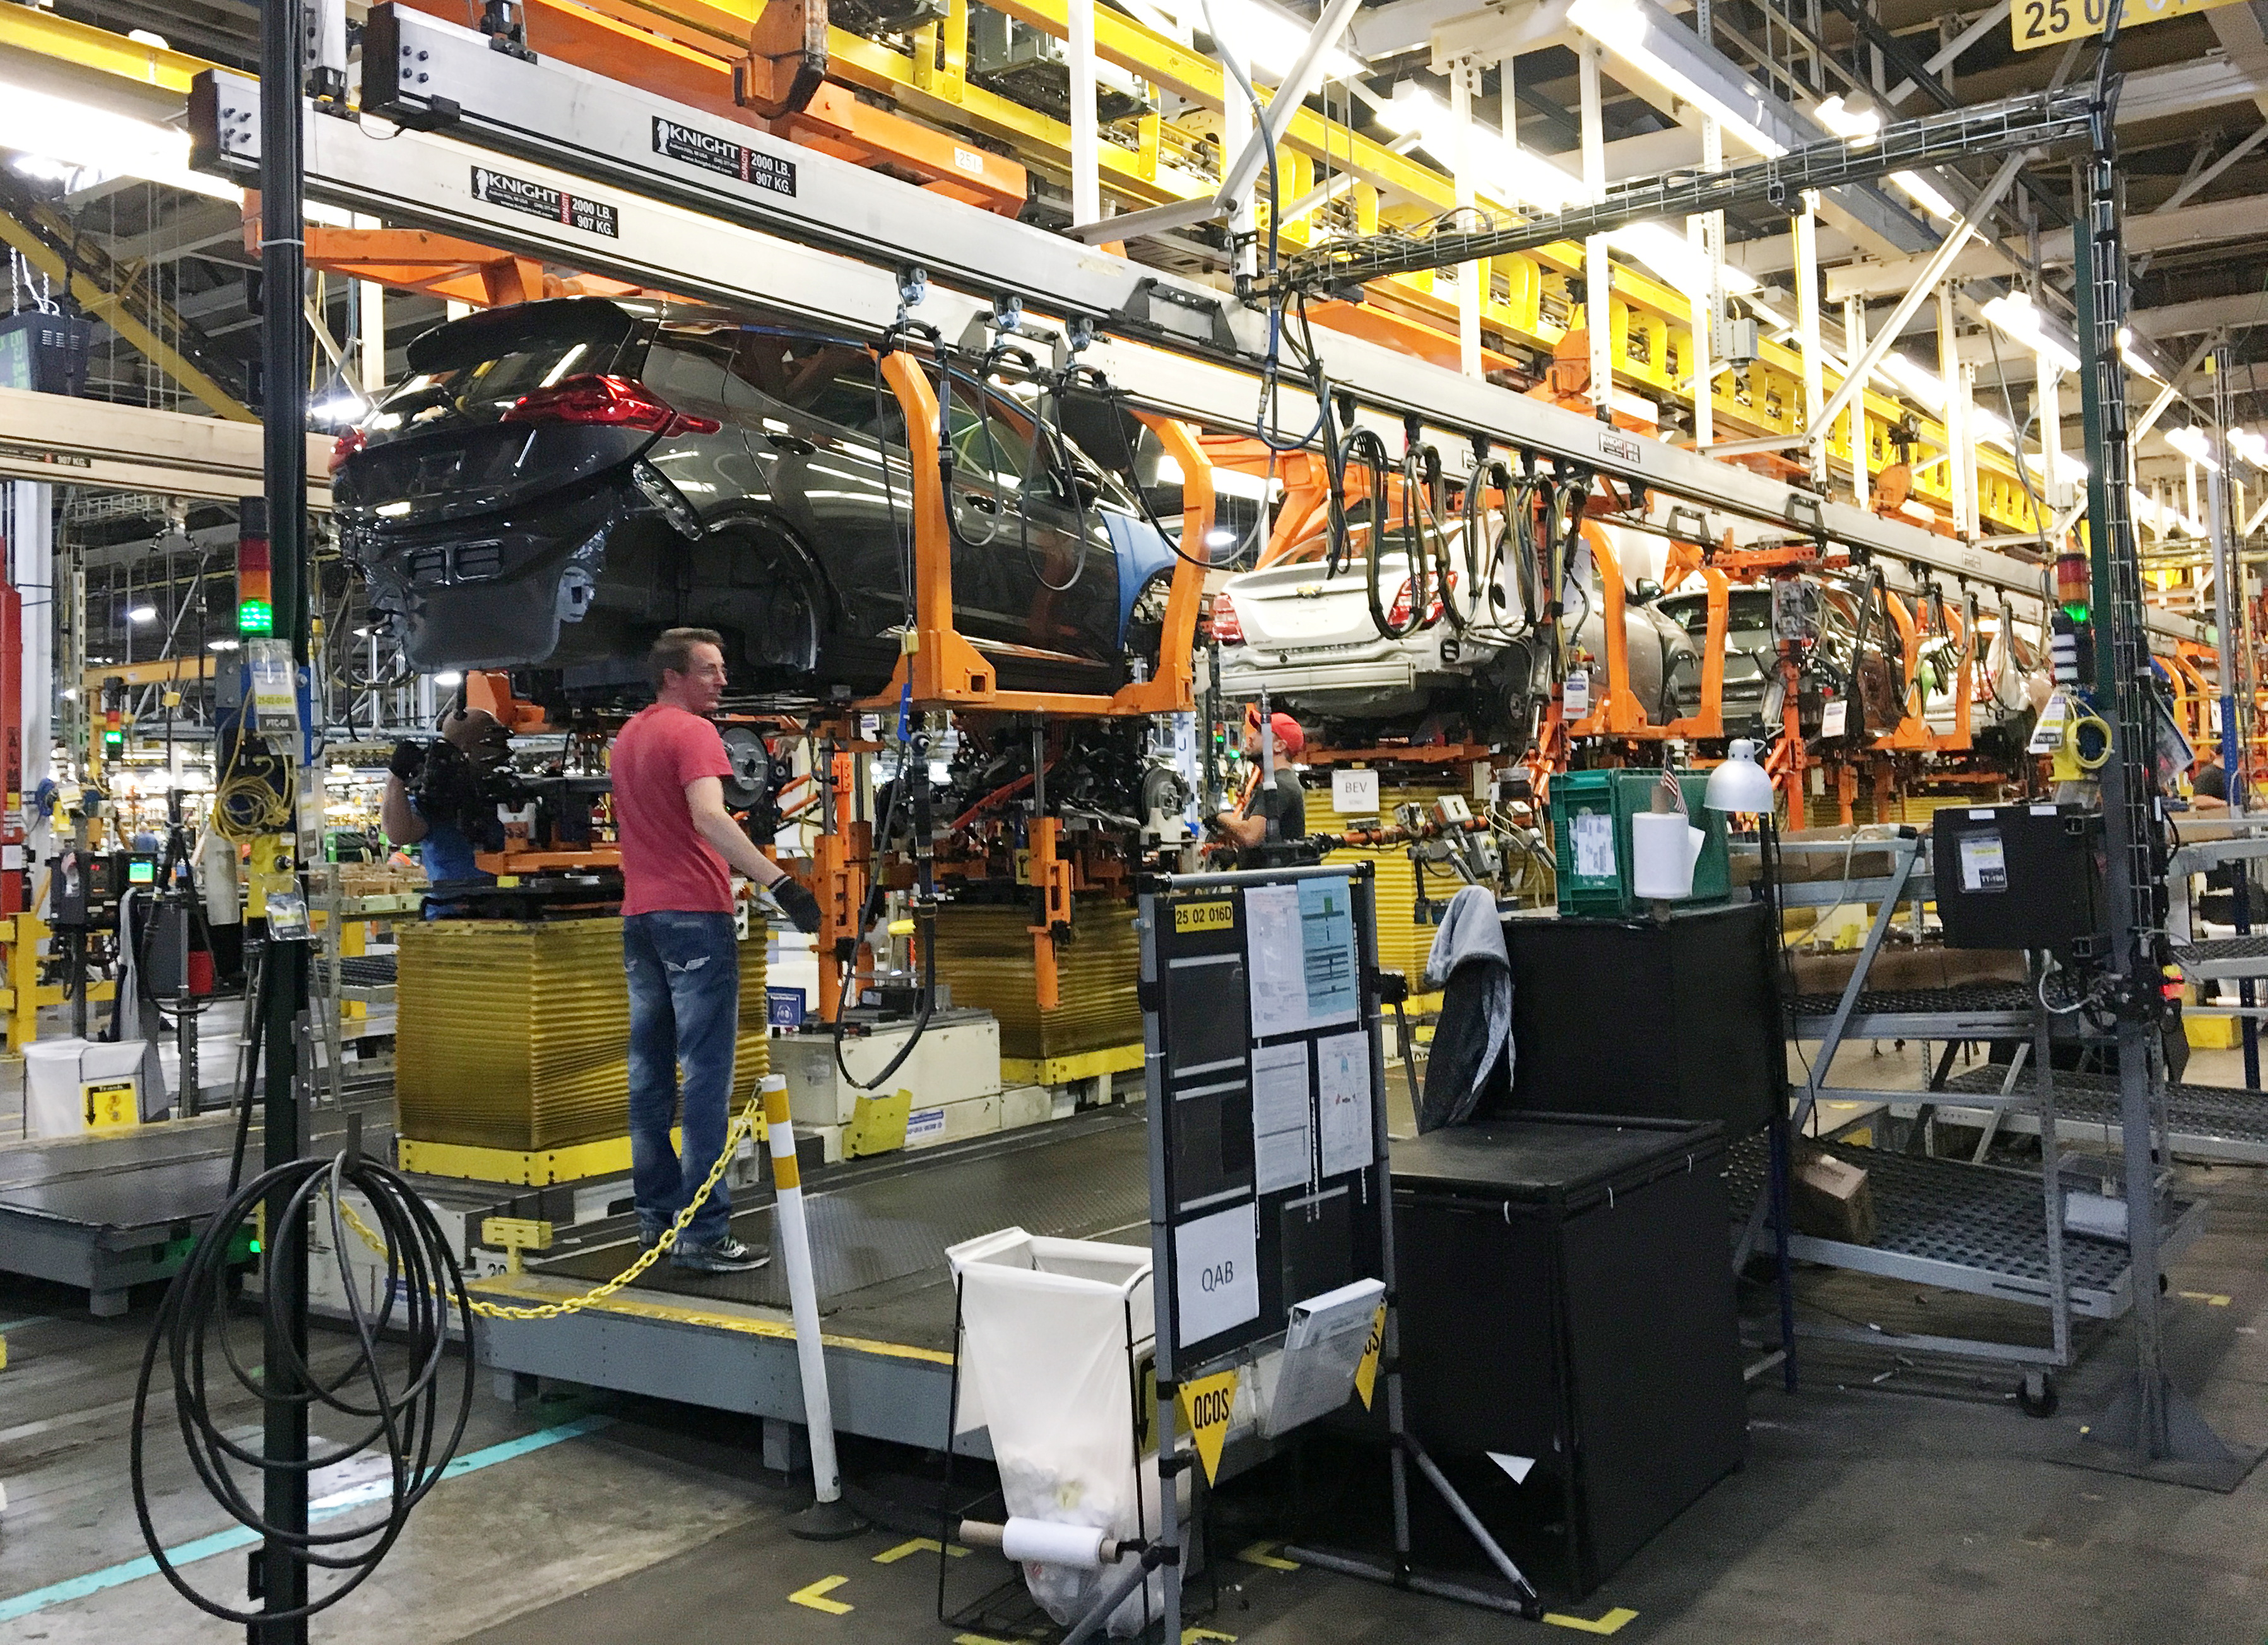 Workers assemble Chevy Bolt EV cars at the General Motors assembly plant in Orion Township